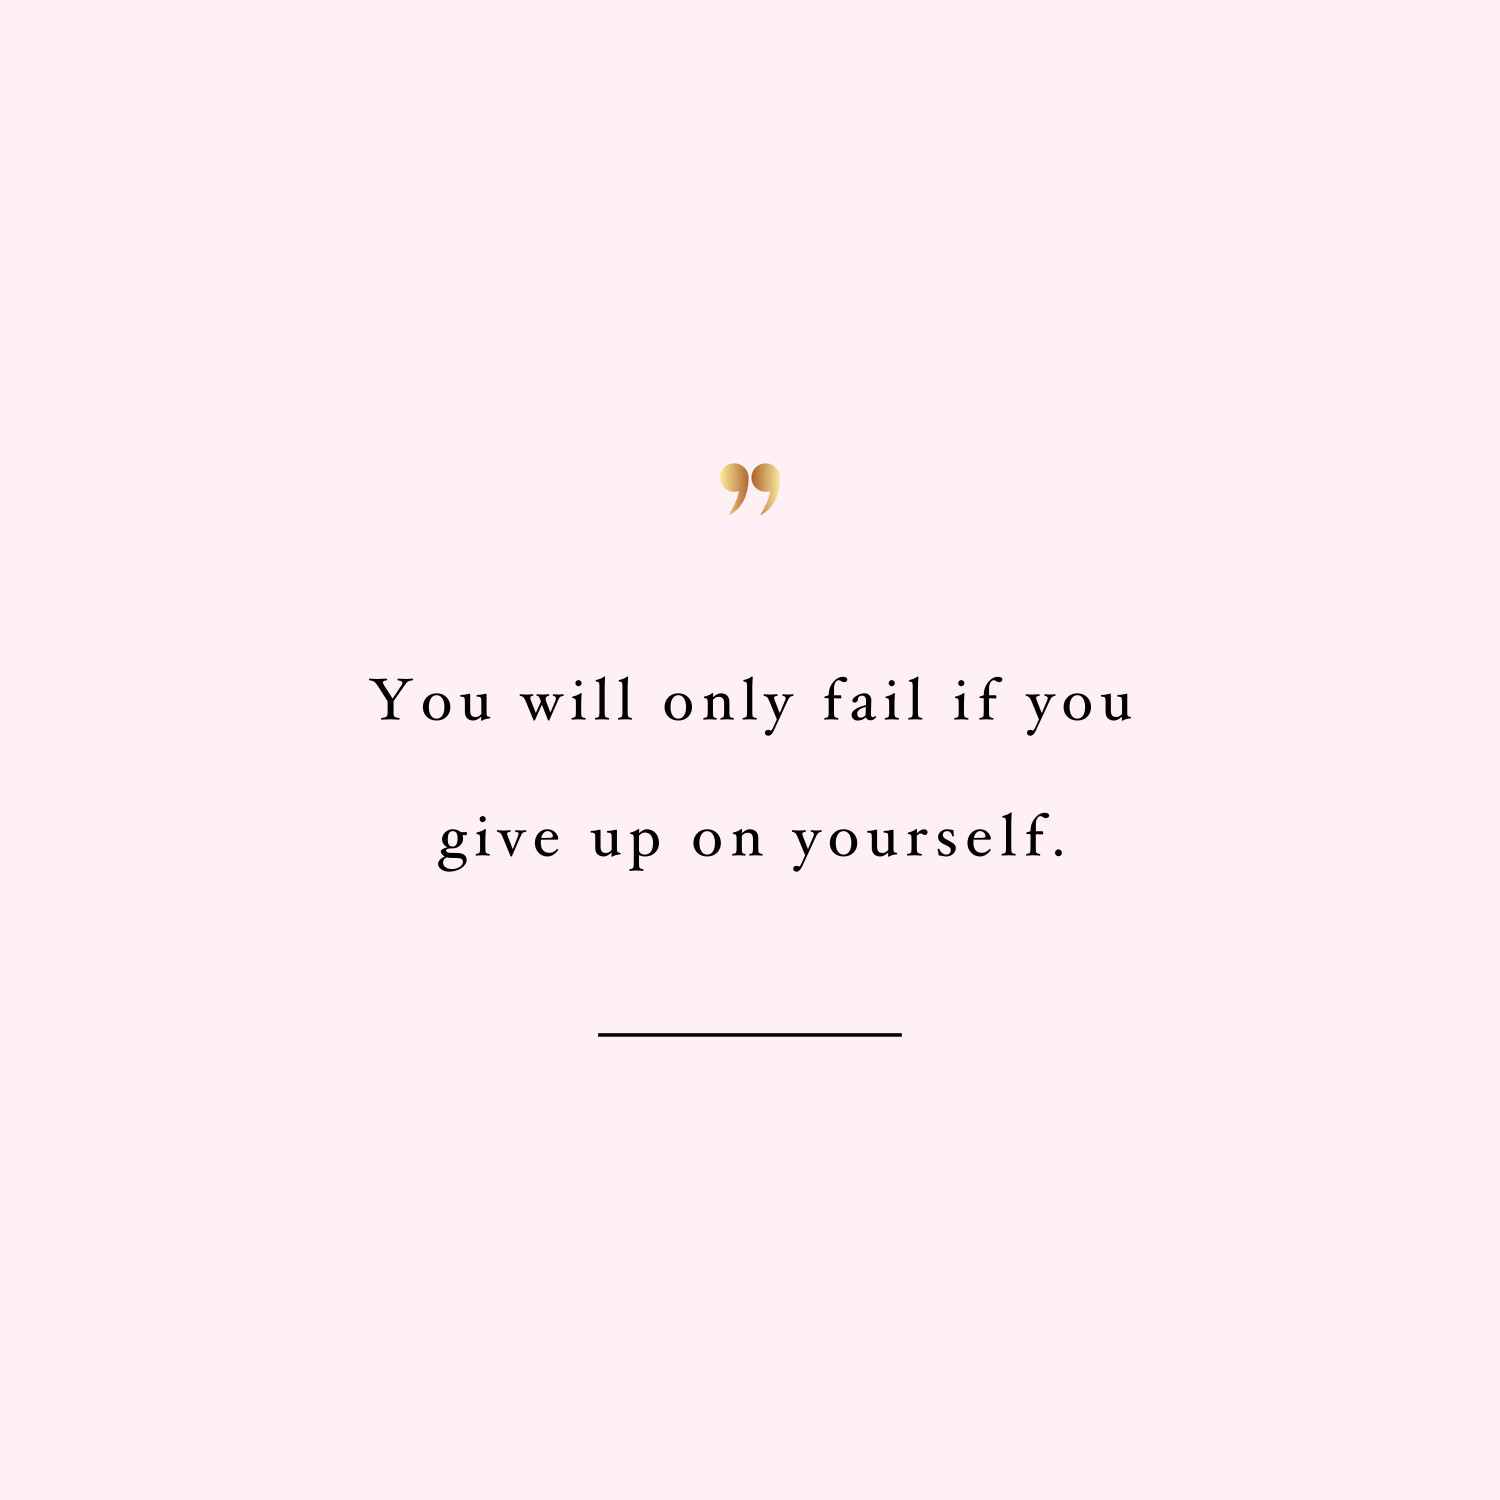 Don't fail! Browse our collection of motivational exercise and weight loss quotes and get instant health an fitness inspiration. Transform positive thoughts into positive actions and get fit, healthy and happy! https://www.spotebi.com/workout-motivation/dont-fail-exercise-and-weight-loss-quote/